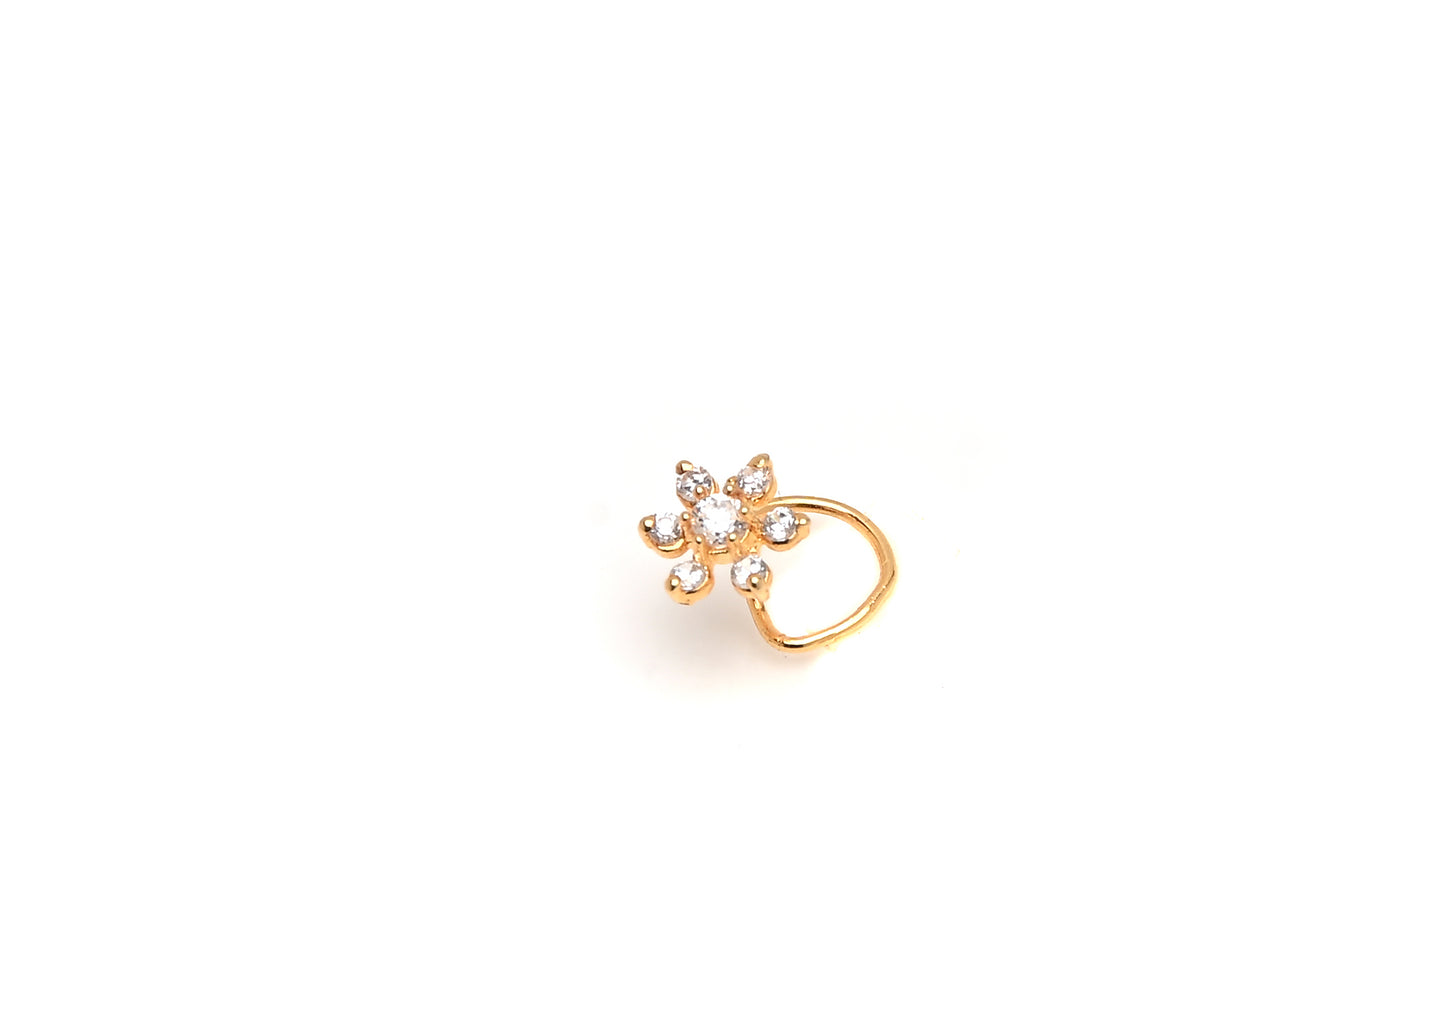 Star Round Nose pin (Gold Plated 925 Sterling Silver)